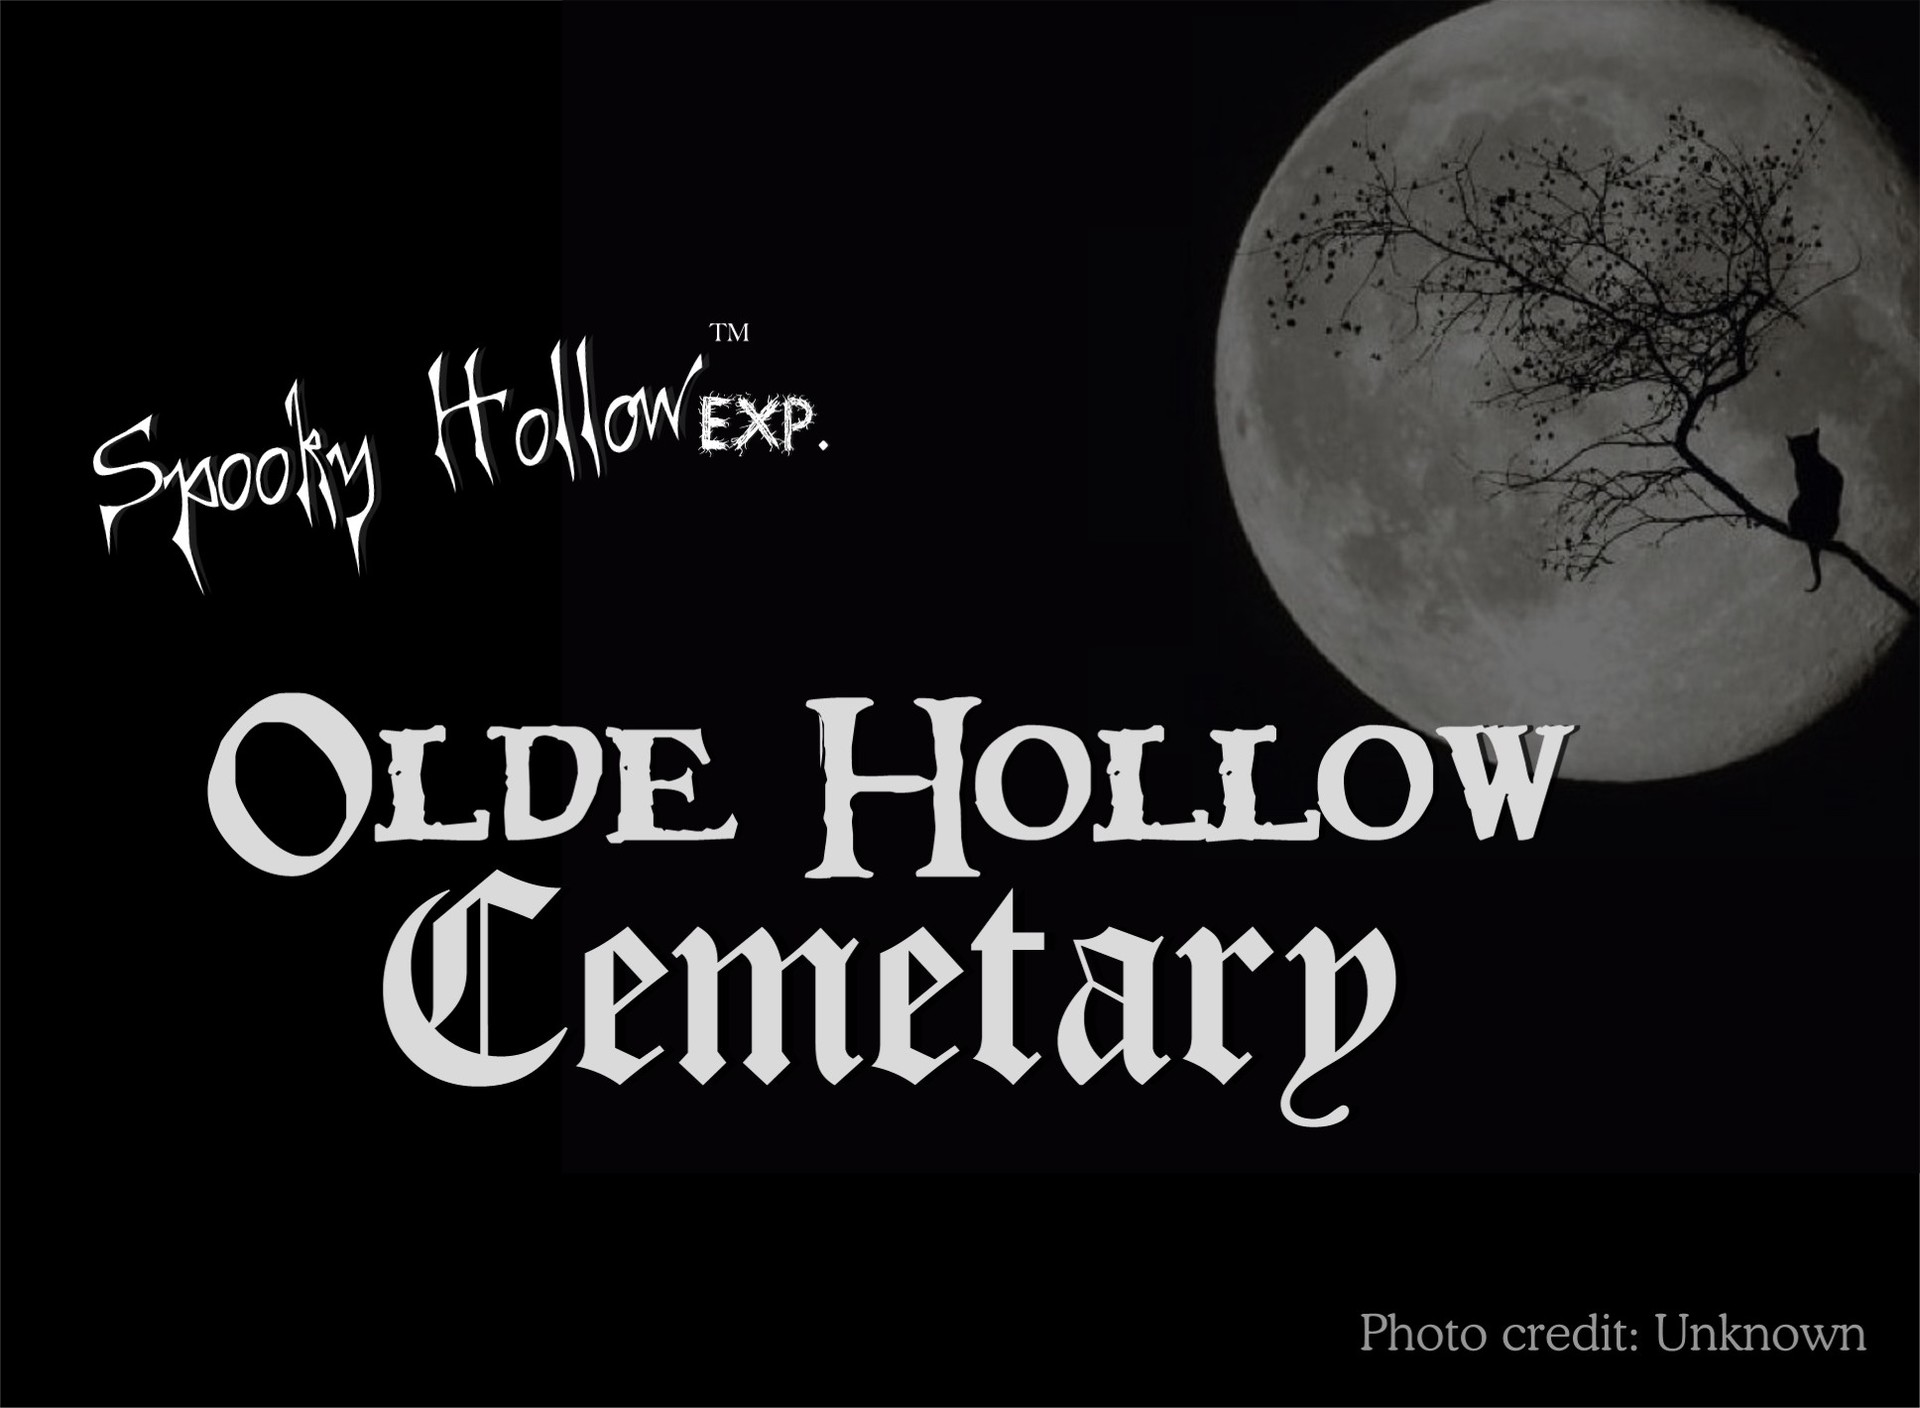 Spooky Hollow Experience Olde Hollow Cemetery title